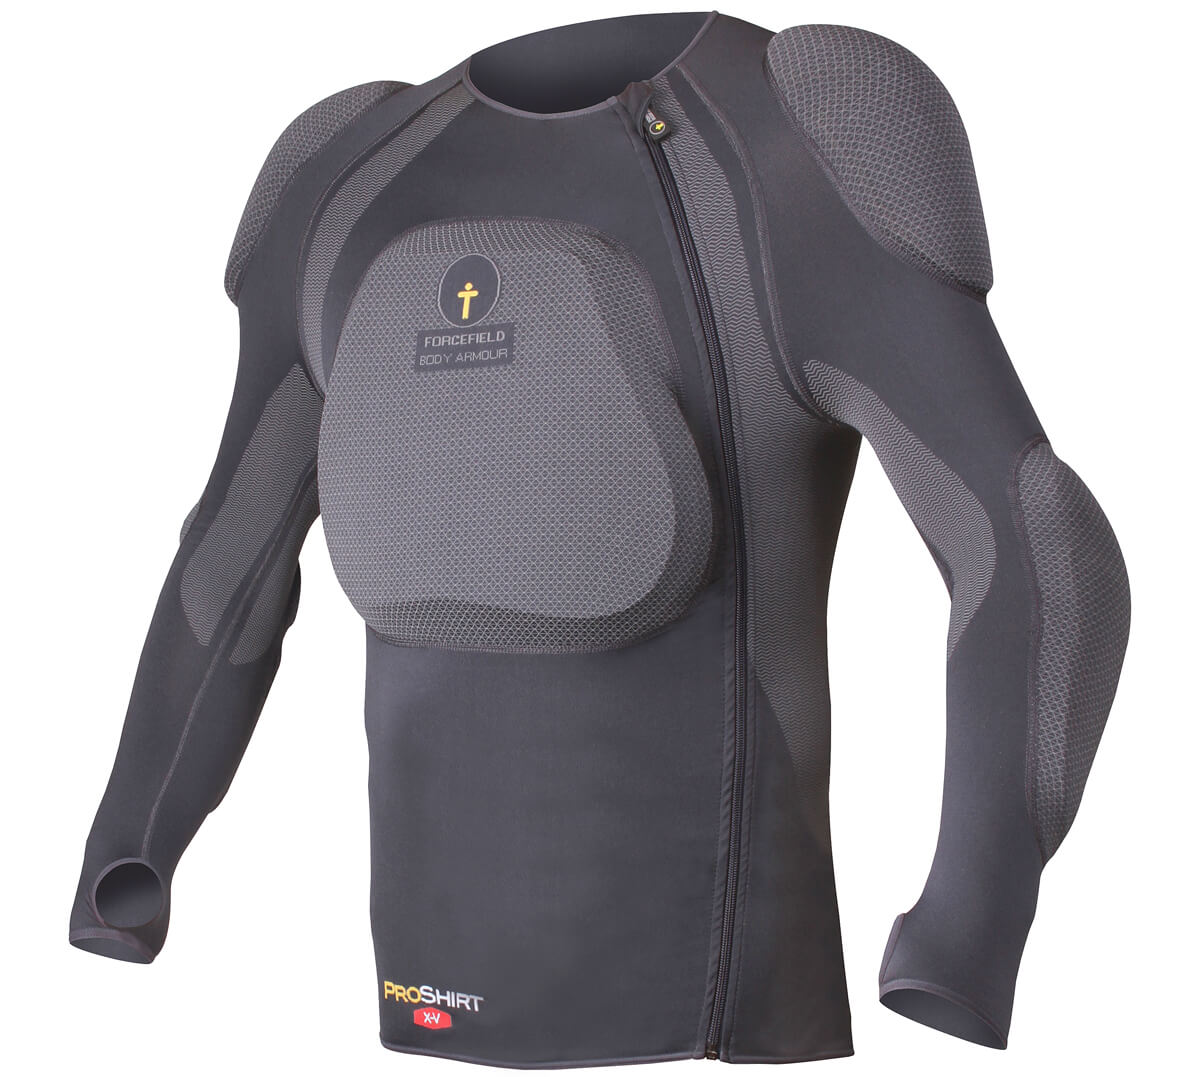 FORCEFIELD motorcycle body armour PRO Shirt XV and bottom for Dual Sport Touring